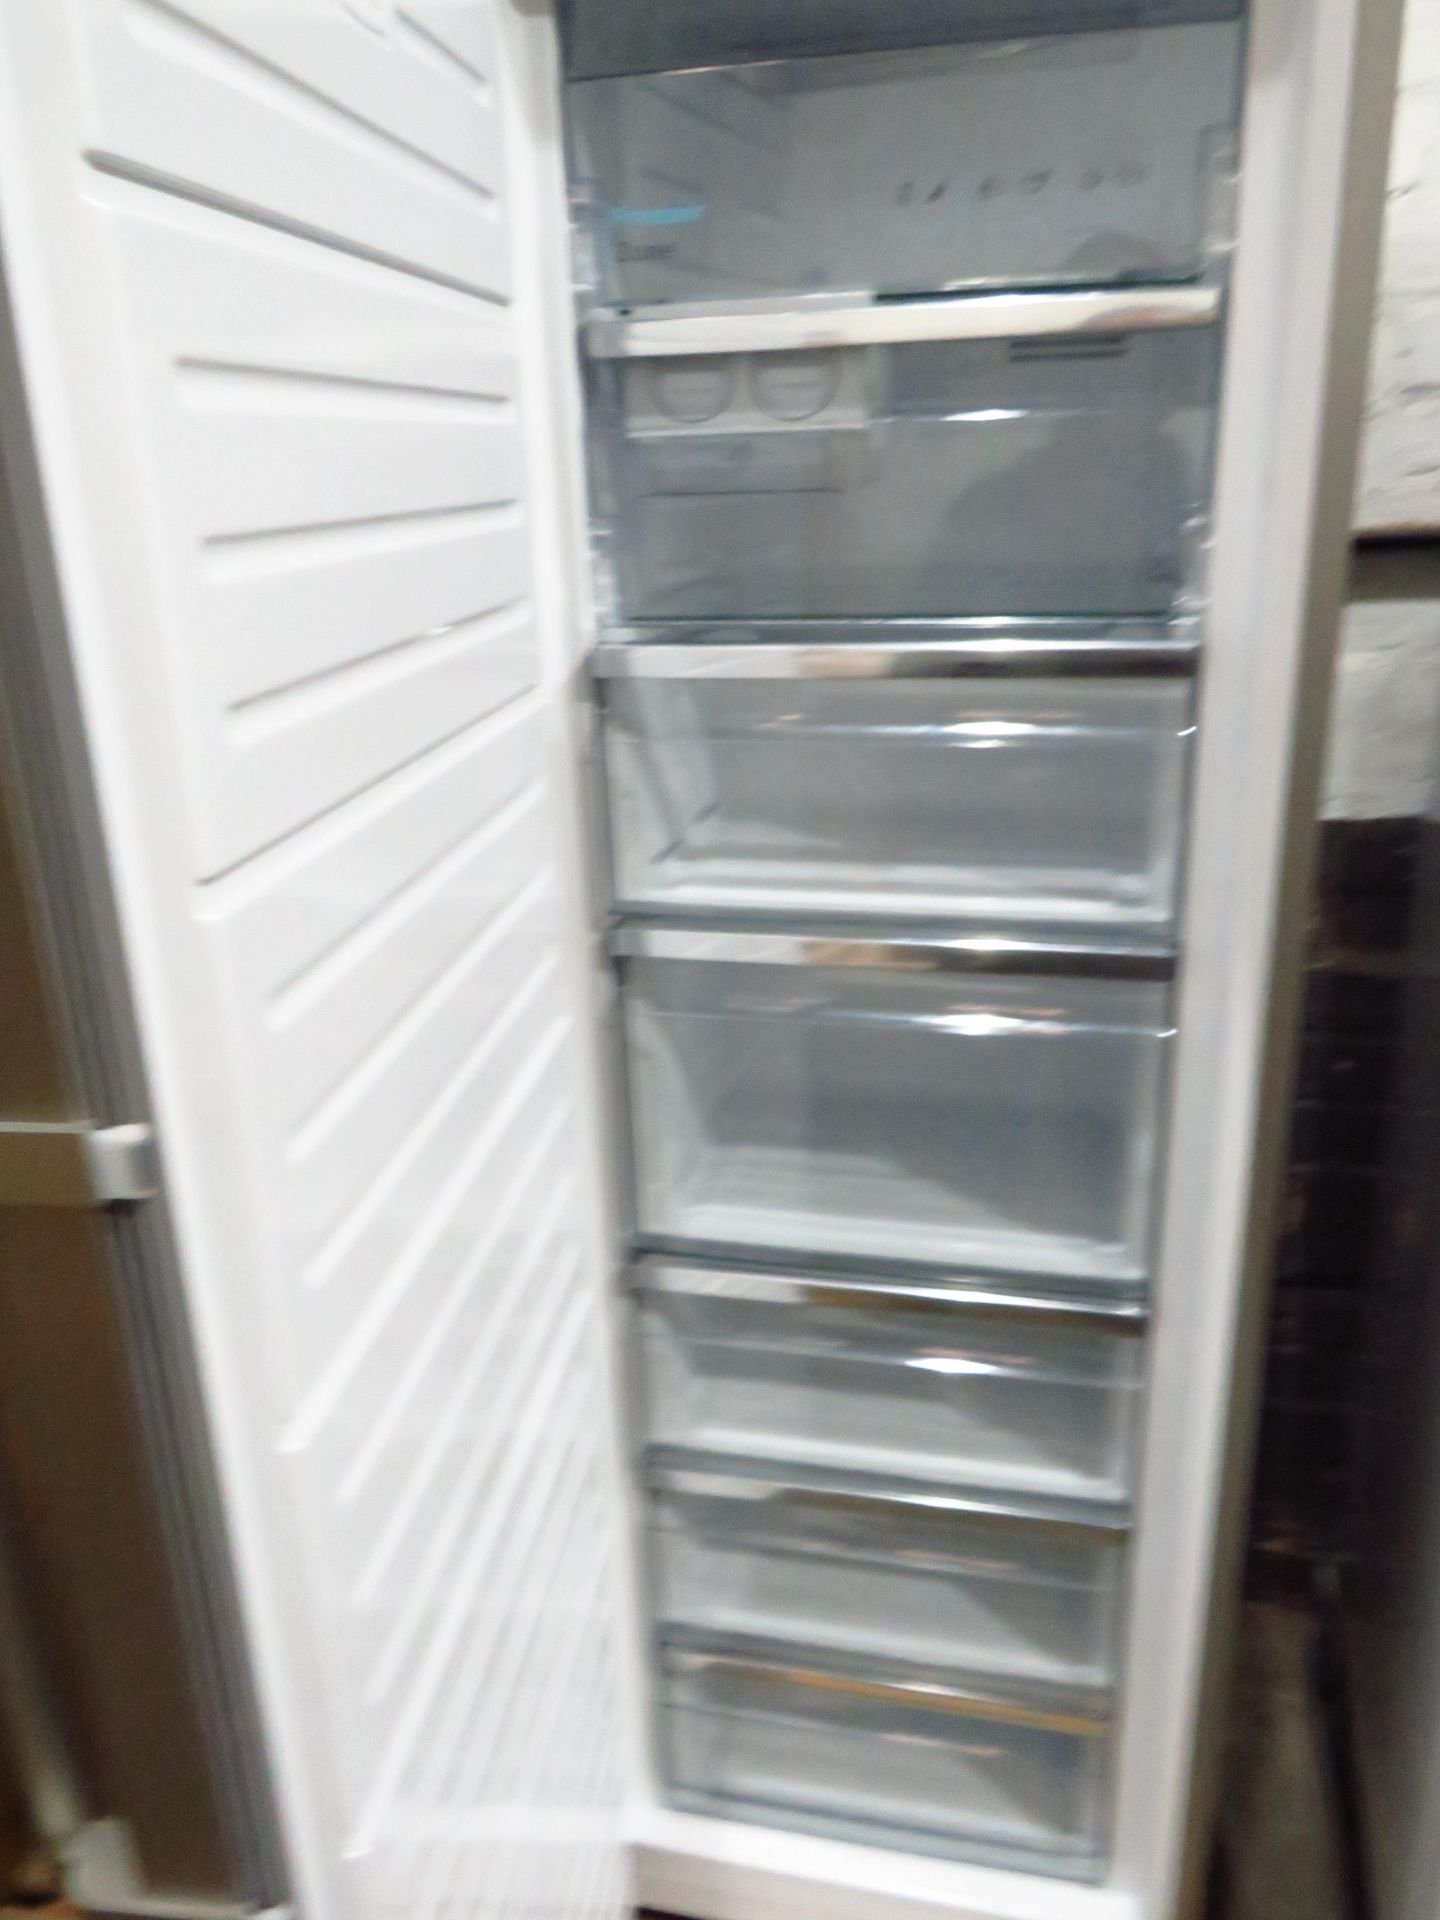 Sharp tall freestanding freezers, tested and working for coldness - Image 2 of 2